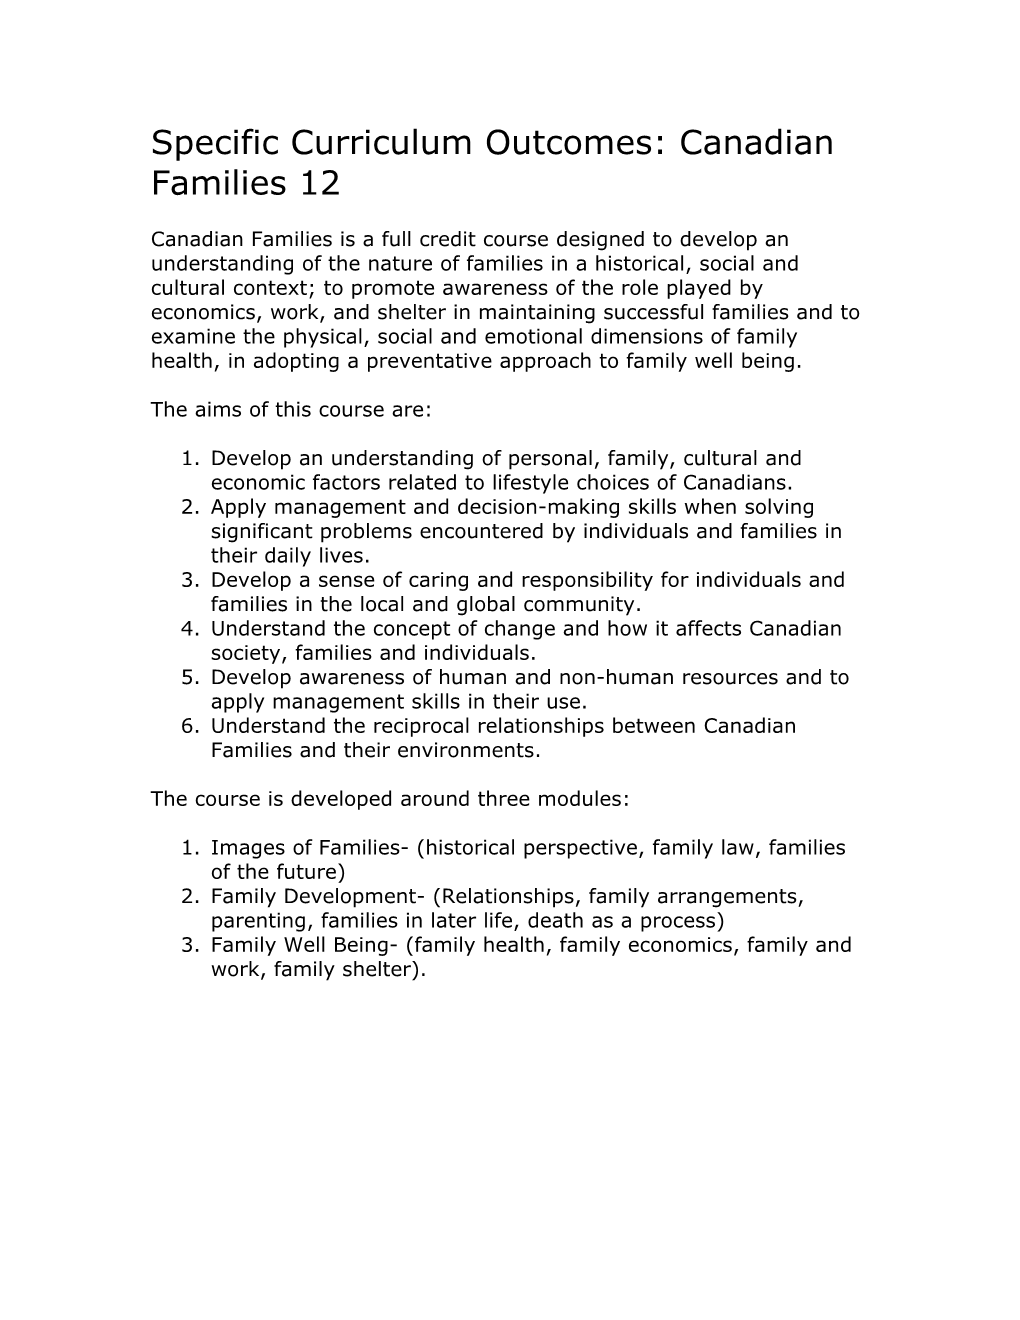 Specific Curriculum Outcomes: Canadian Families 12